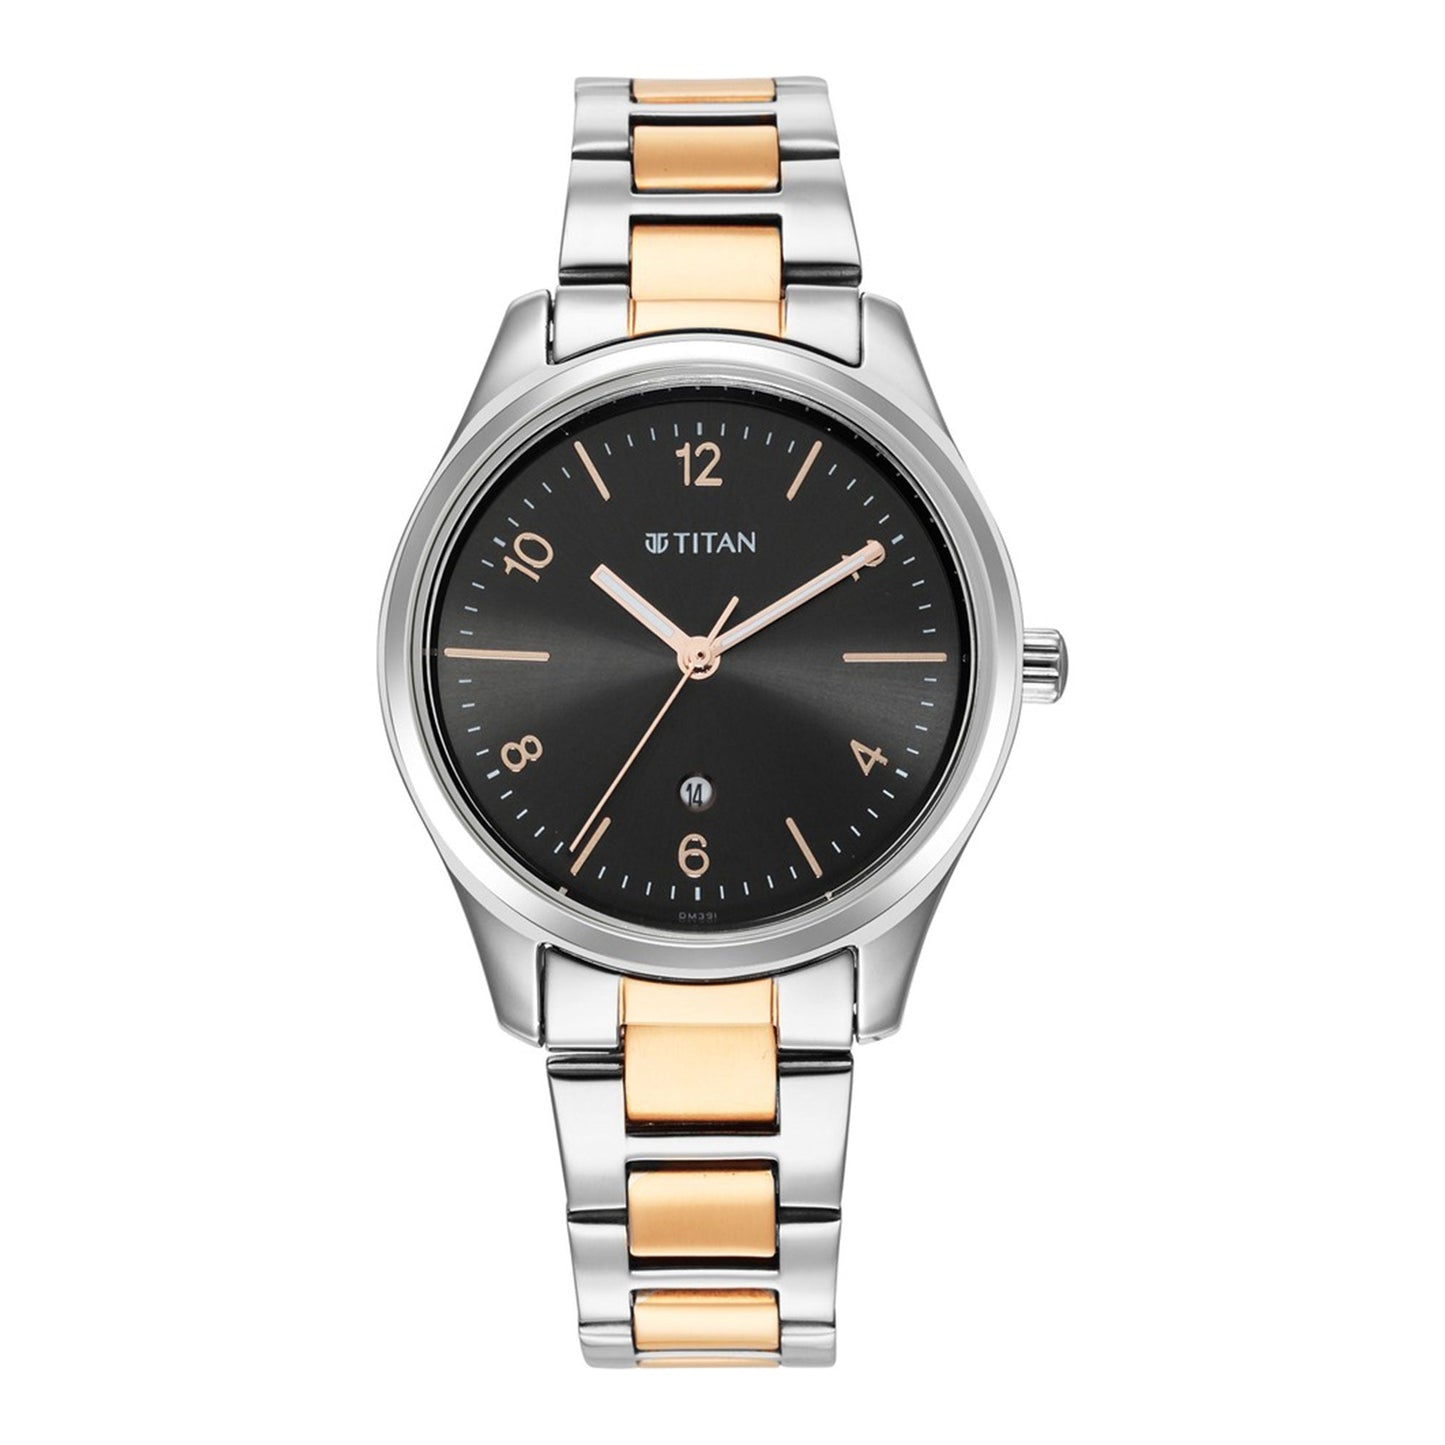 Titan Trendsetters Anthracite Dial Women Watch With Stainless Steel Strap